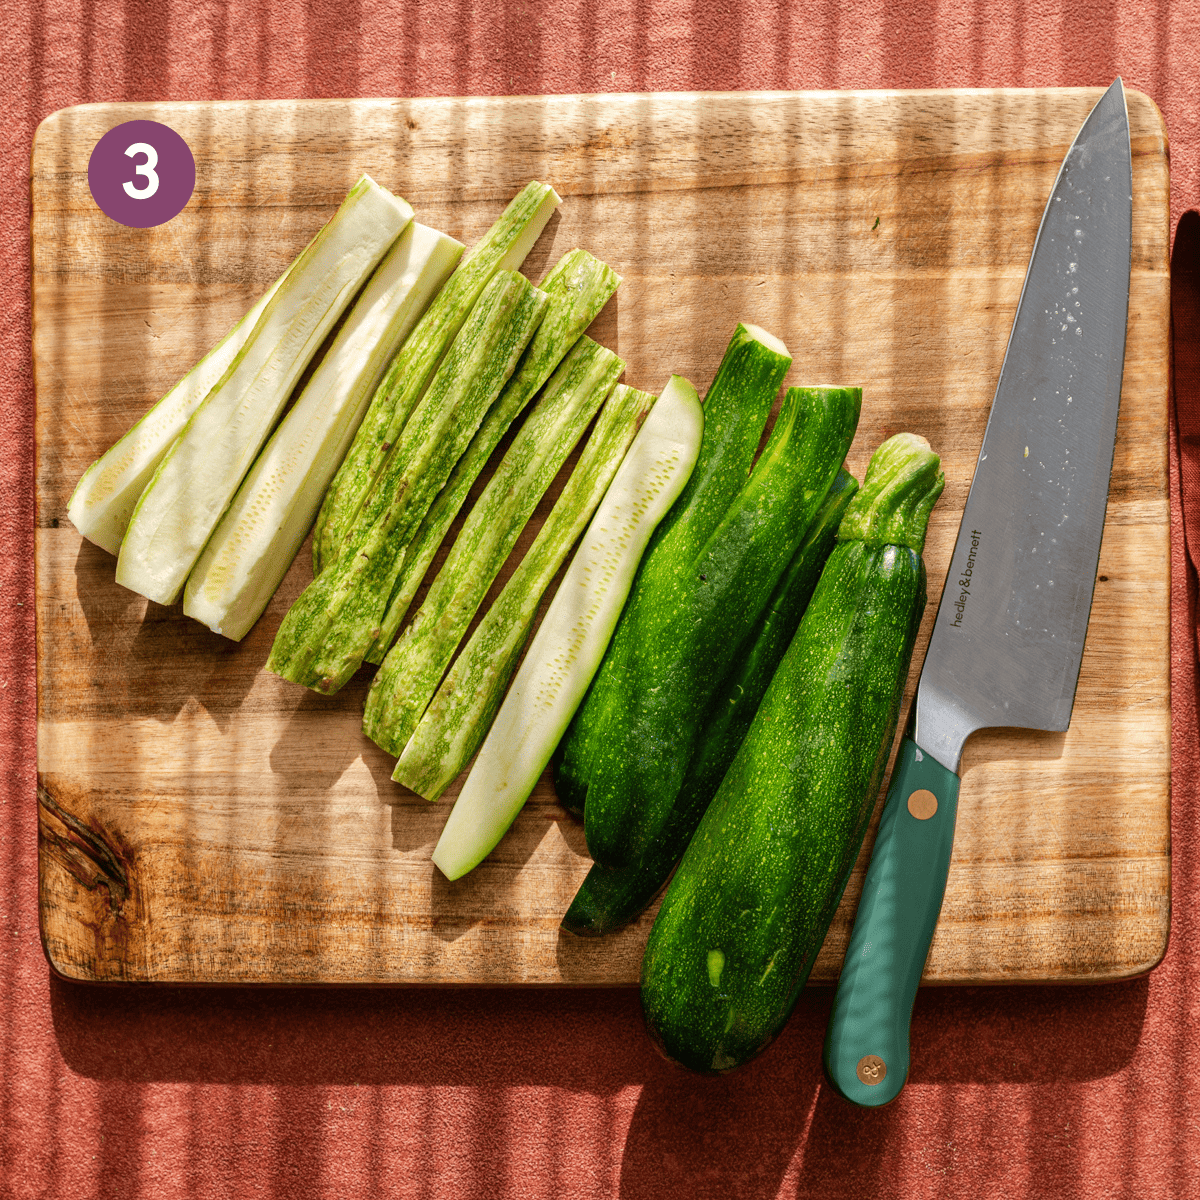 Zucchini sliced lengthwise and arranged on a wooden cutting board with a knife.